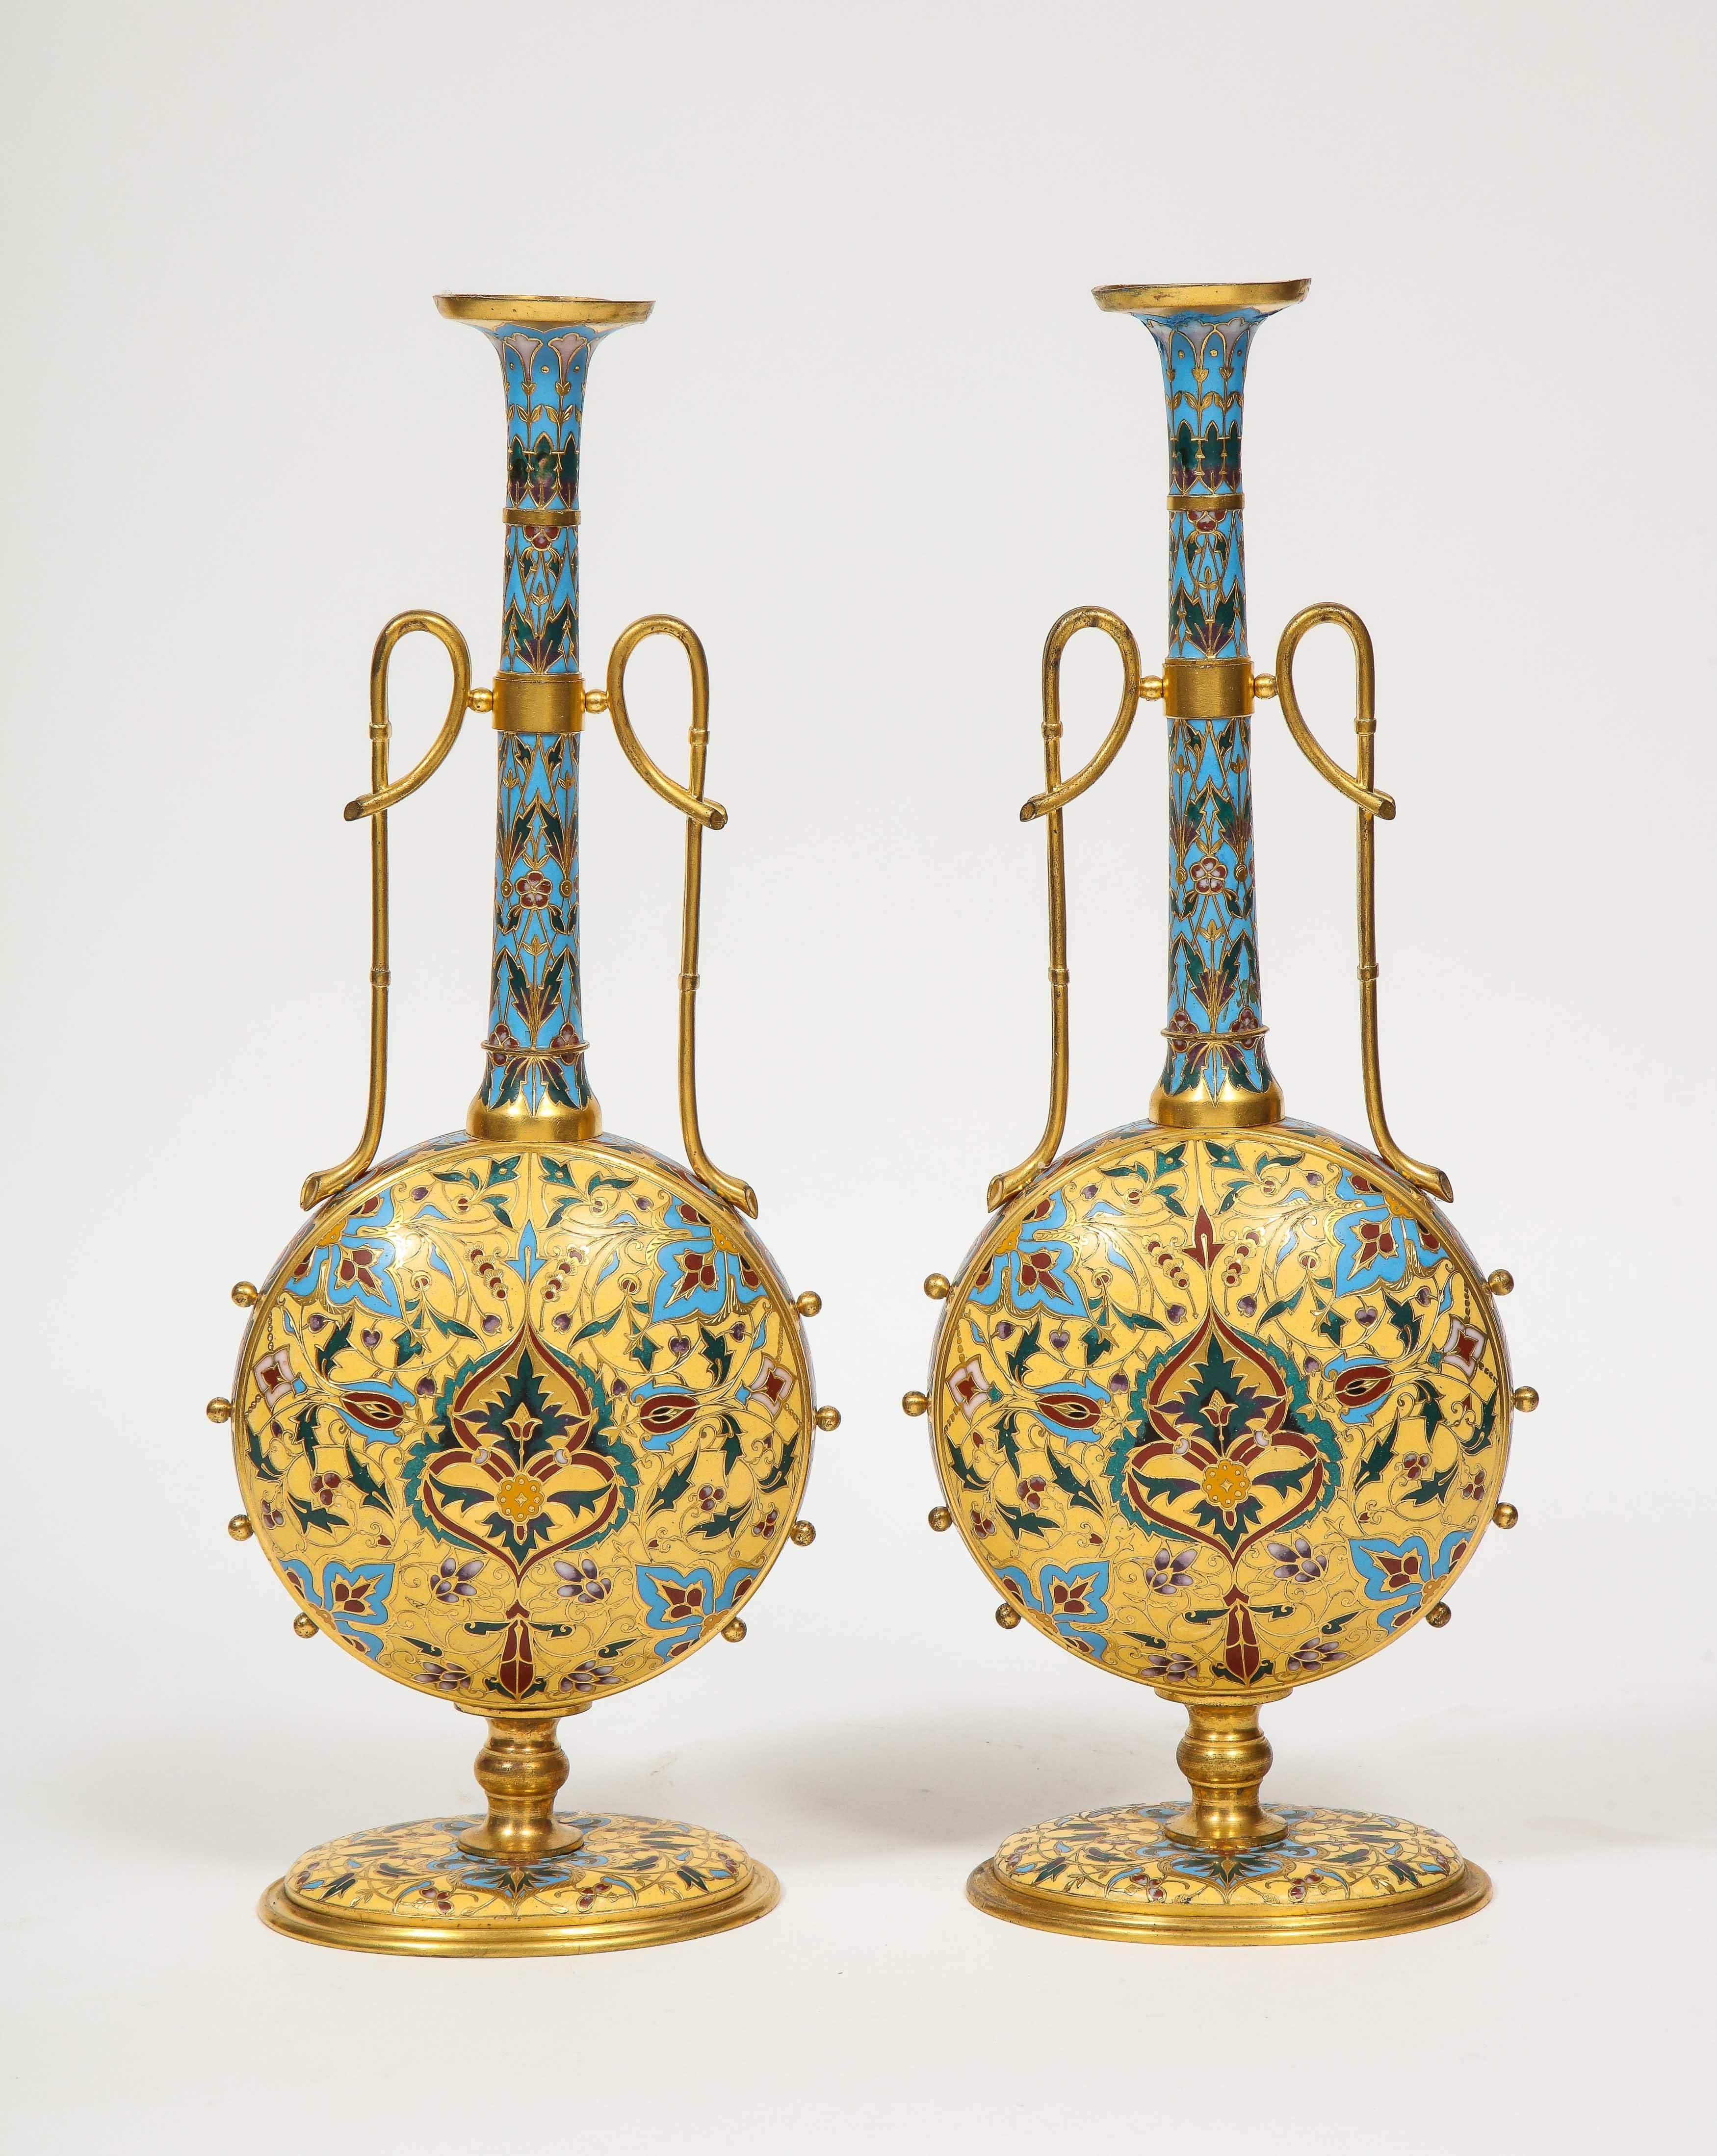 An extremely rare, museum quality pair of Ferdinand Barbedienne ormolu and champlevé enamel vases, circa 1870, certainly designed by Louis Constant Sevin. 

Very unusual form and shape. Enameled with vibrant colors, in the Persian taste. 

An